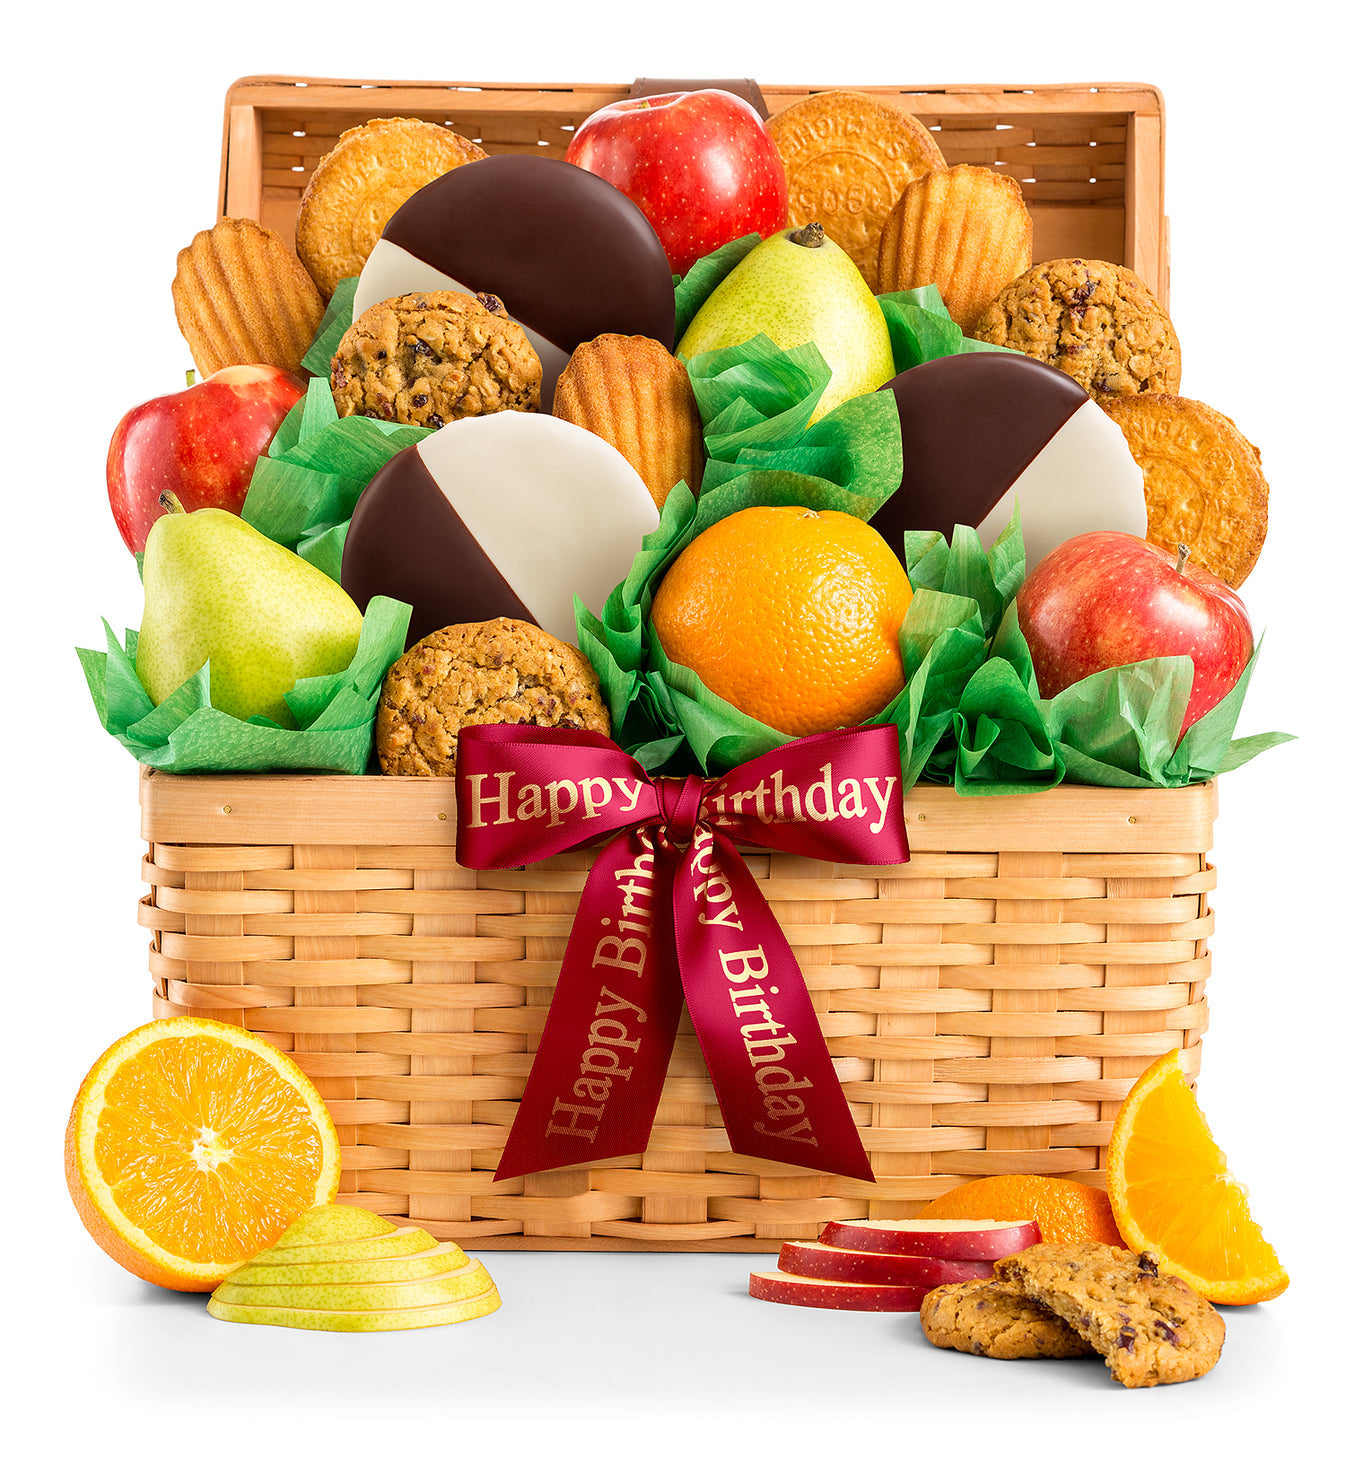 Celebrate Summer Birthdays with a Gift Basket at the Office – GiftTree